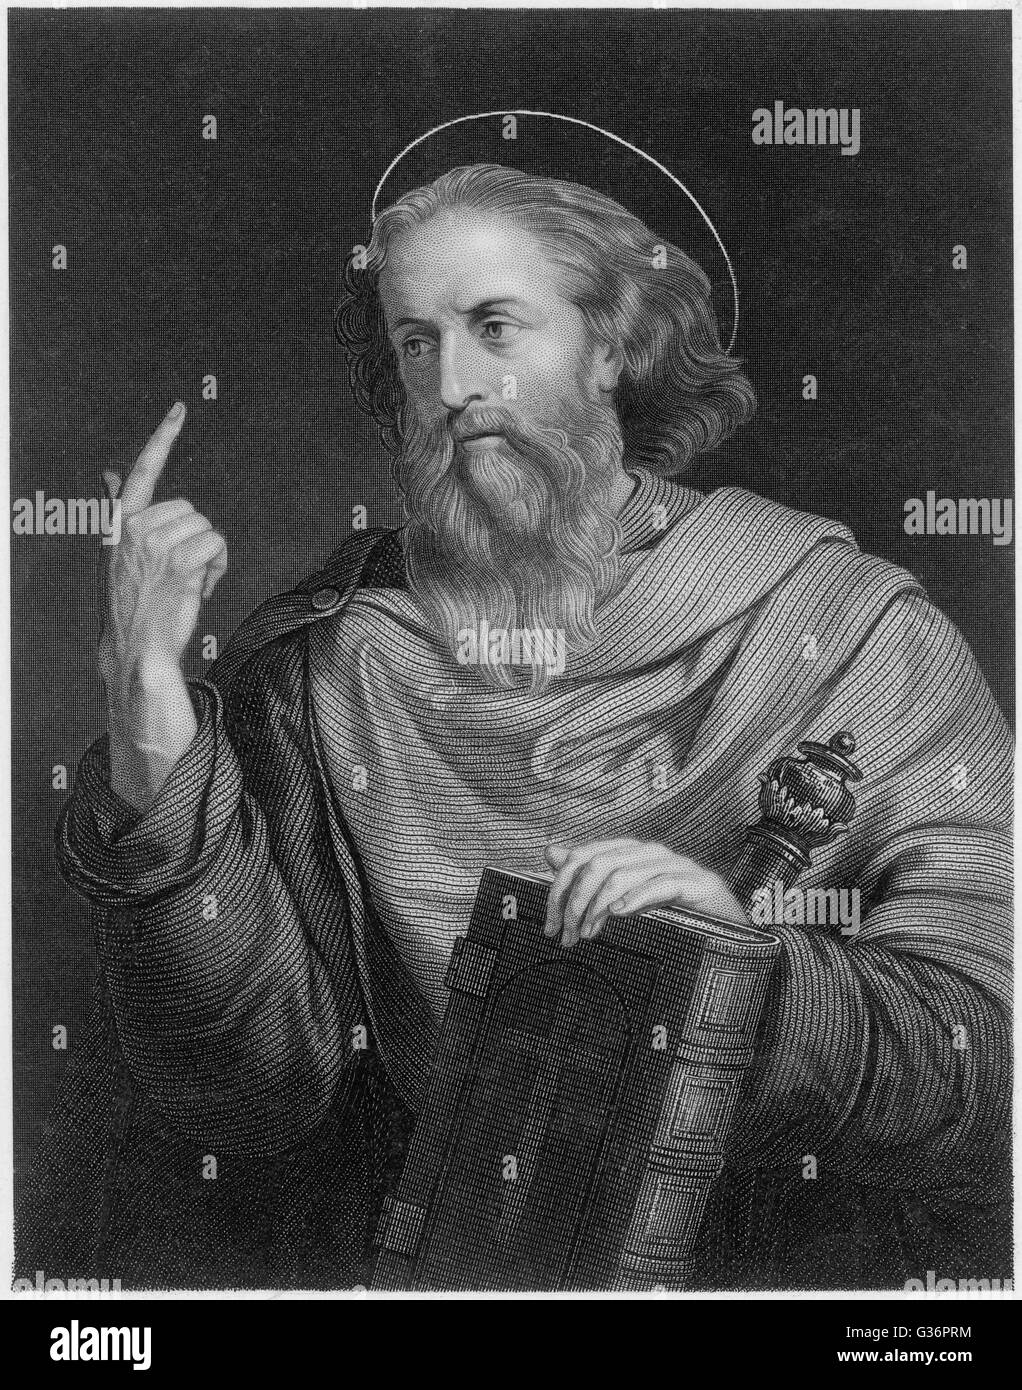 Saint Paul the Apostle, Paul of Tarsus, early Christian leader who went on several journeys to preach the gospel to the Gentiles, as documented in several books of the New Testament. Before his conversion his name was Saul.       Date: circa 5 - circa 67 Stock Photo